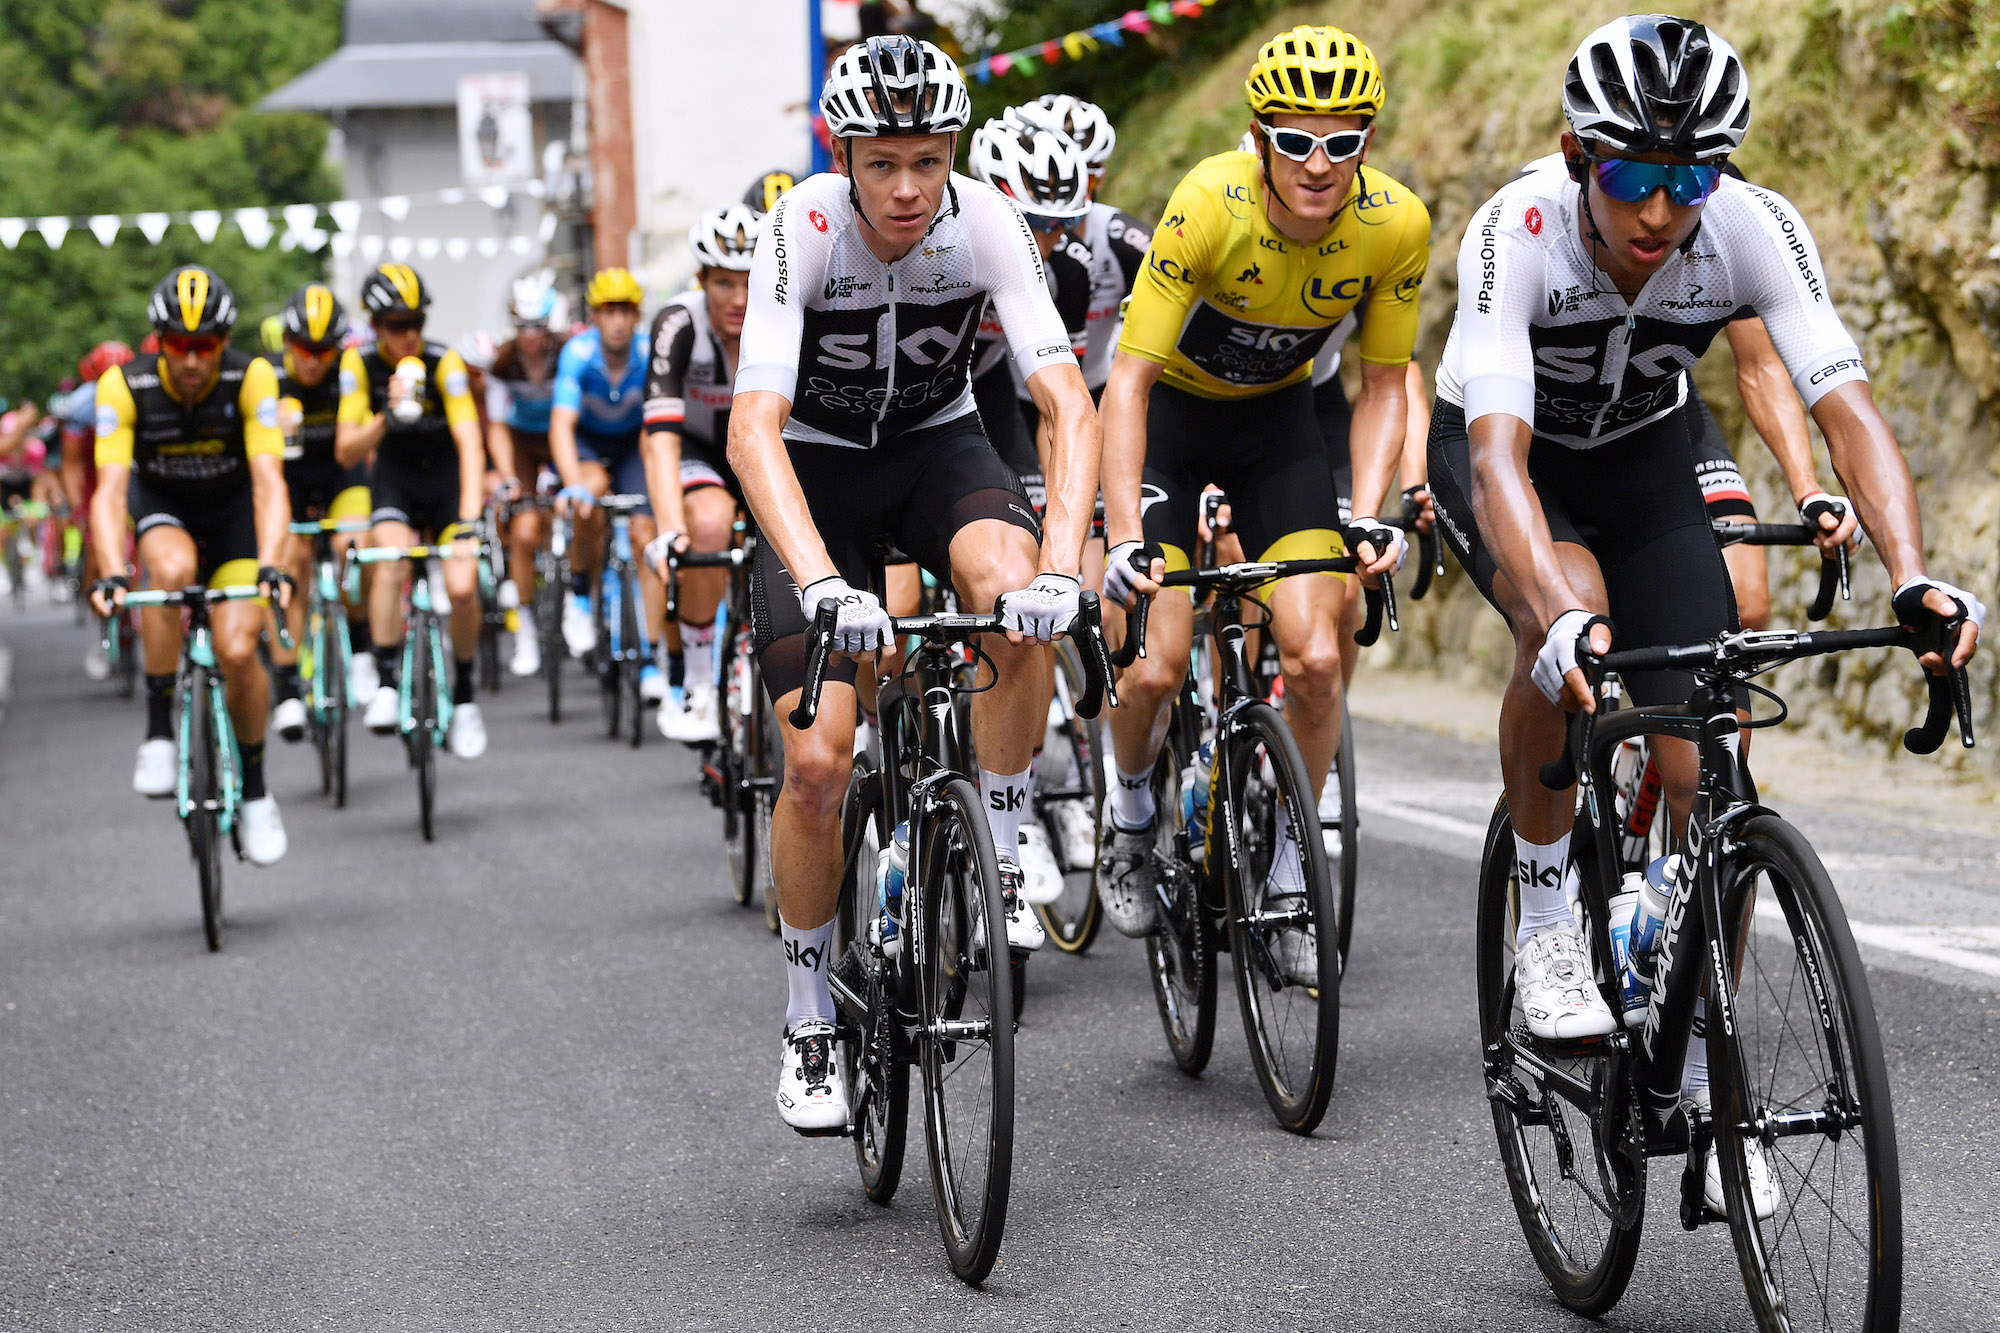 Team Ineos Tour de France squad Here are the eight riders that made